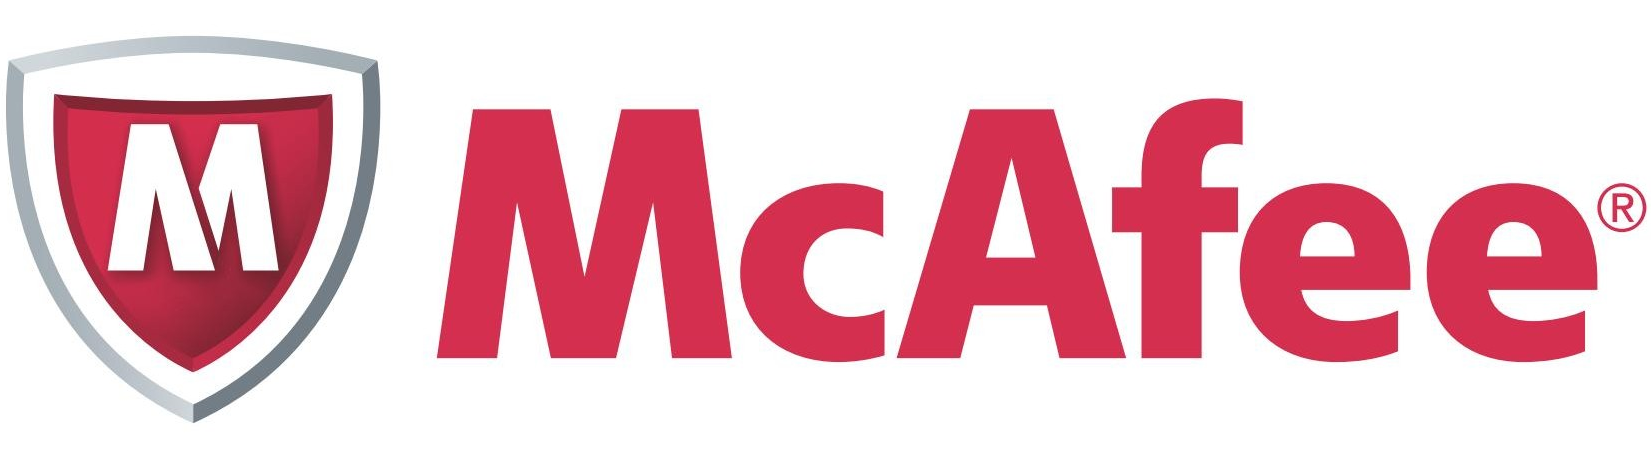 McAfee Network Security NS9500